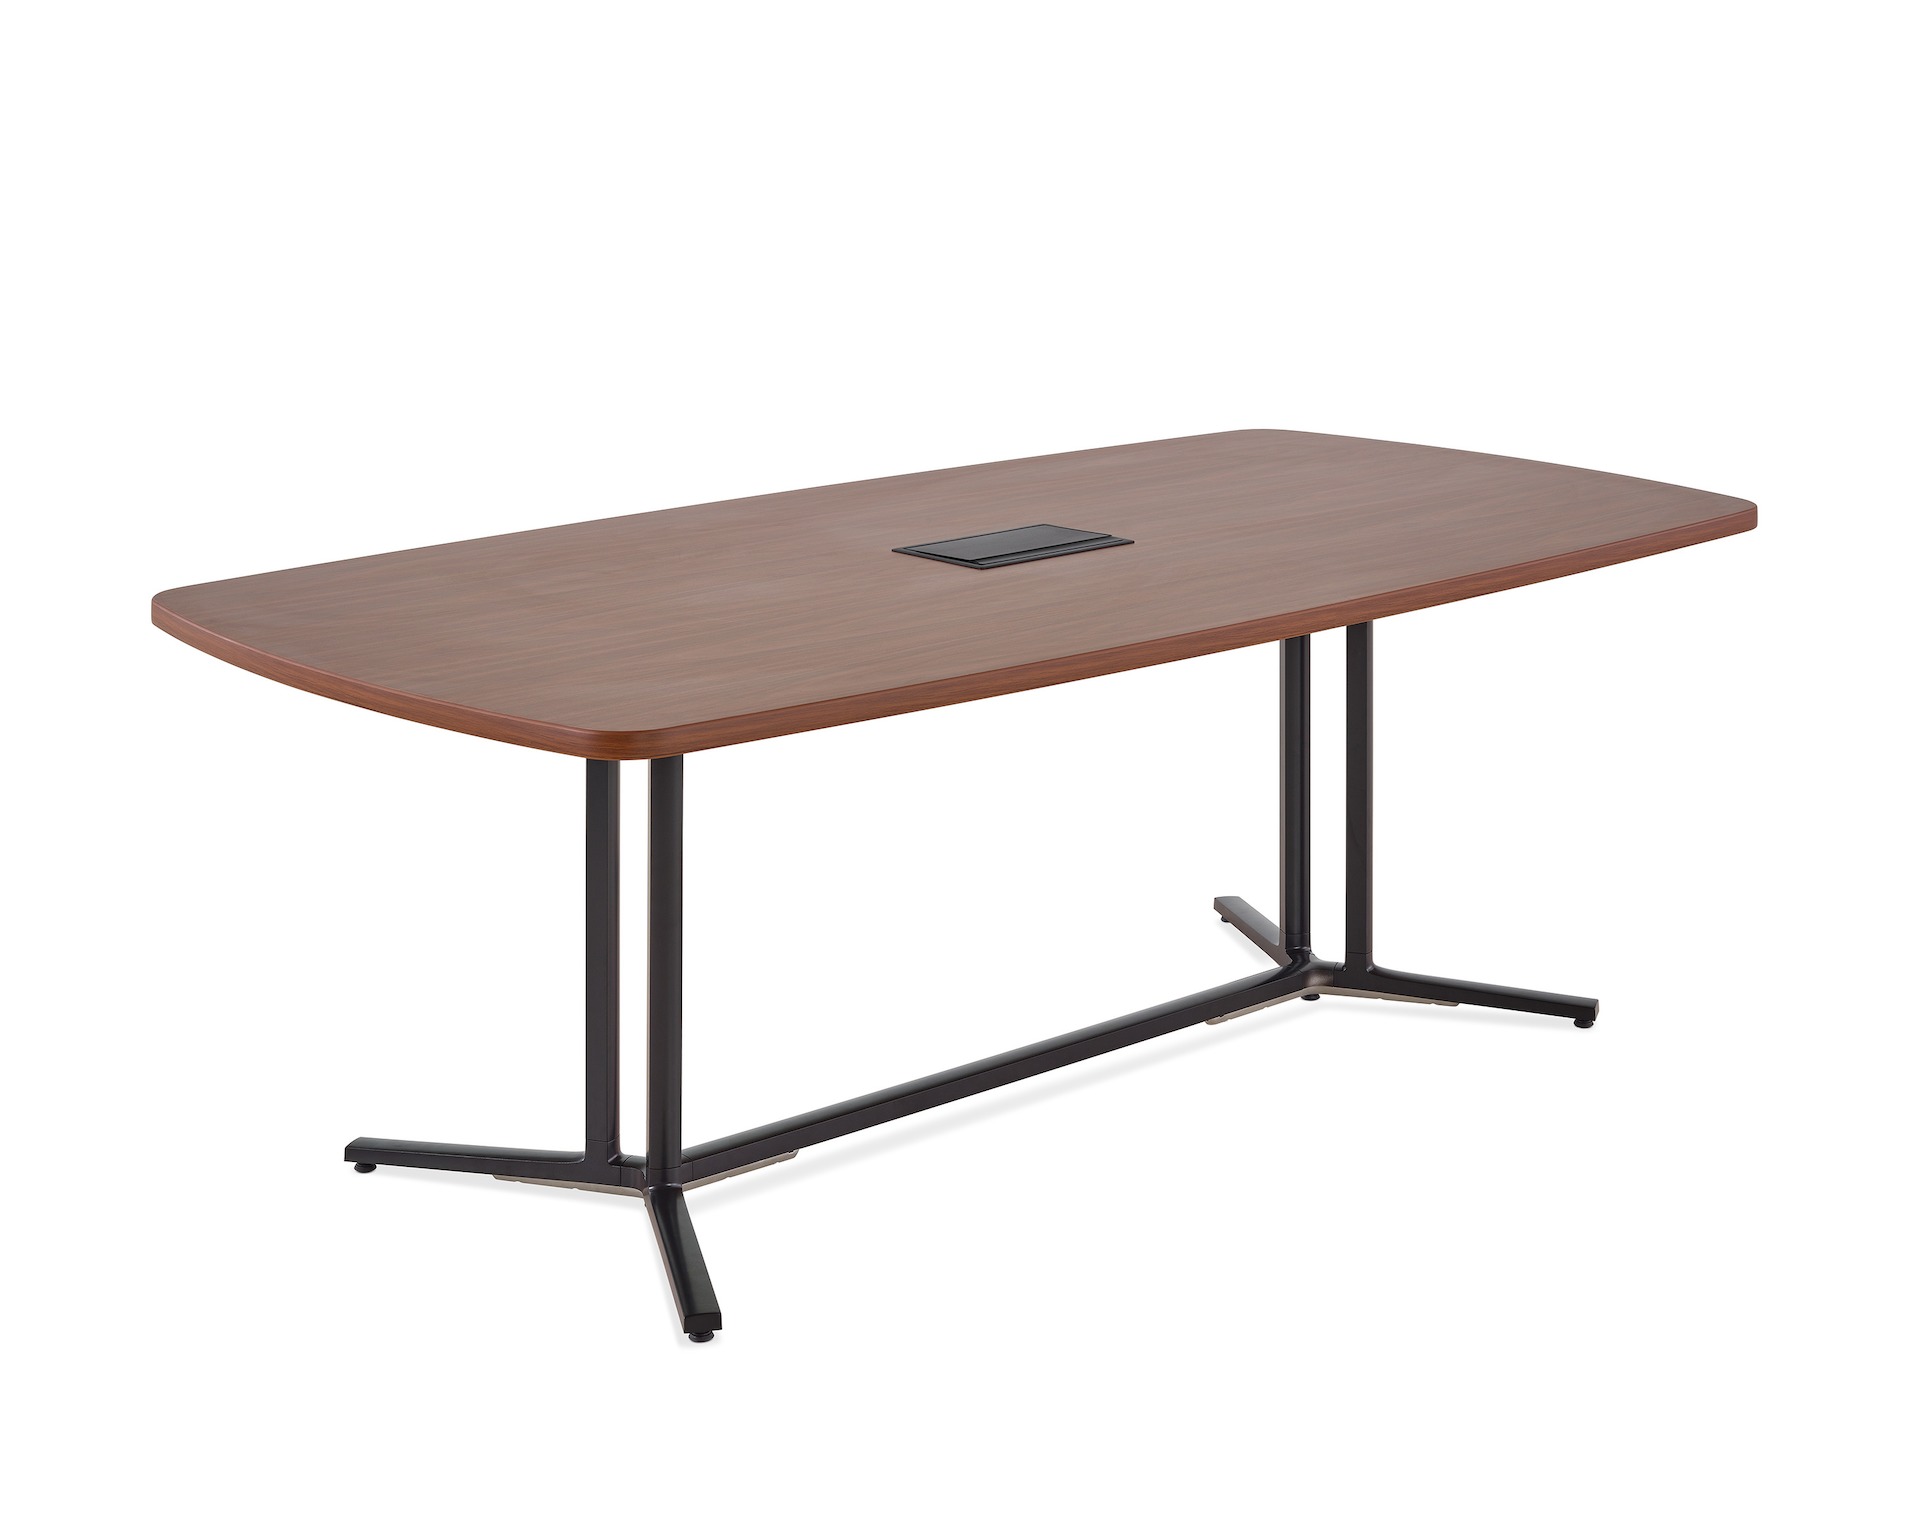 A square edge rectangular Everywhere conference table with a medium walnut woodgrain laminate top and central power access, viewed at an angle.